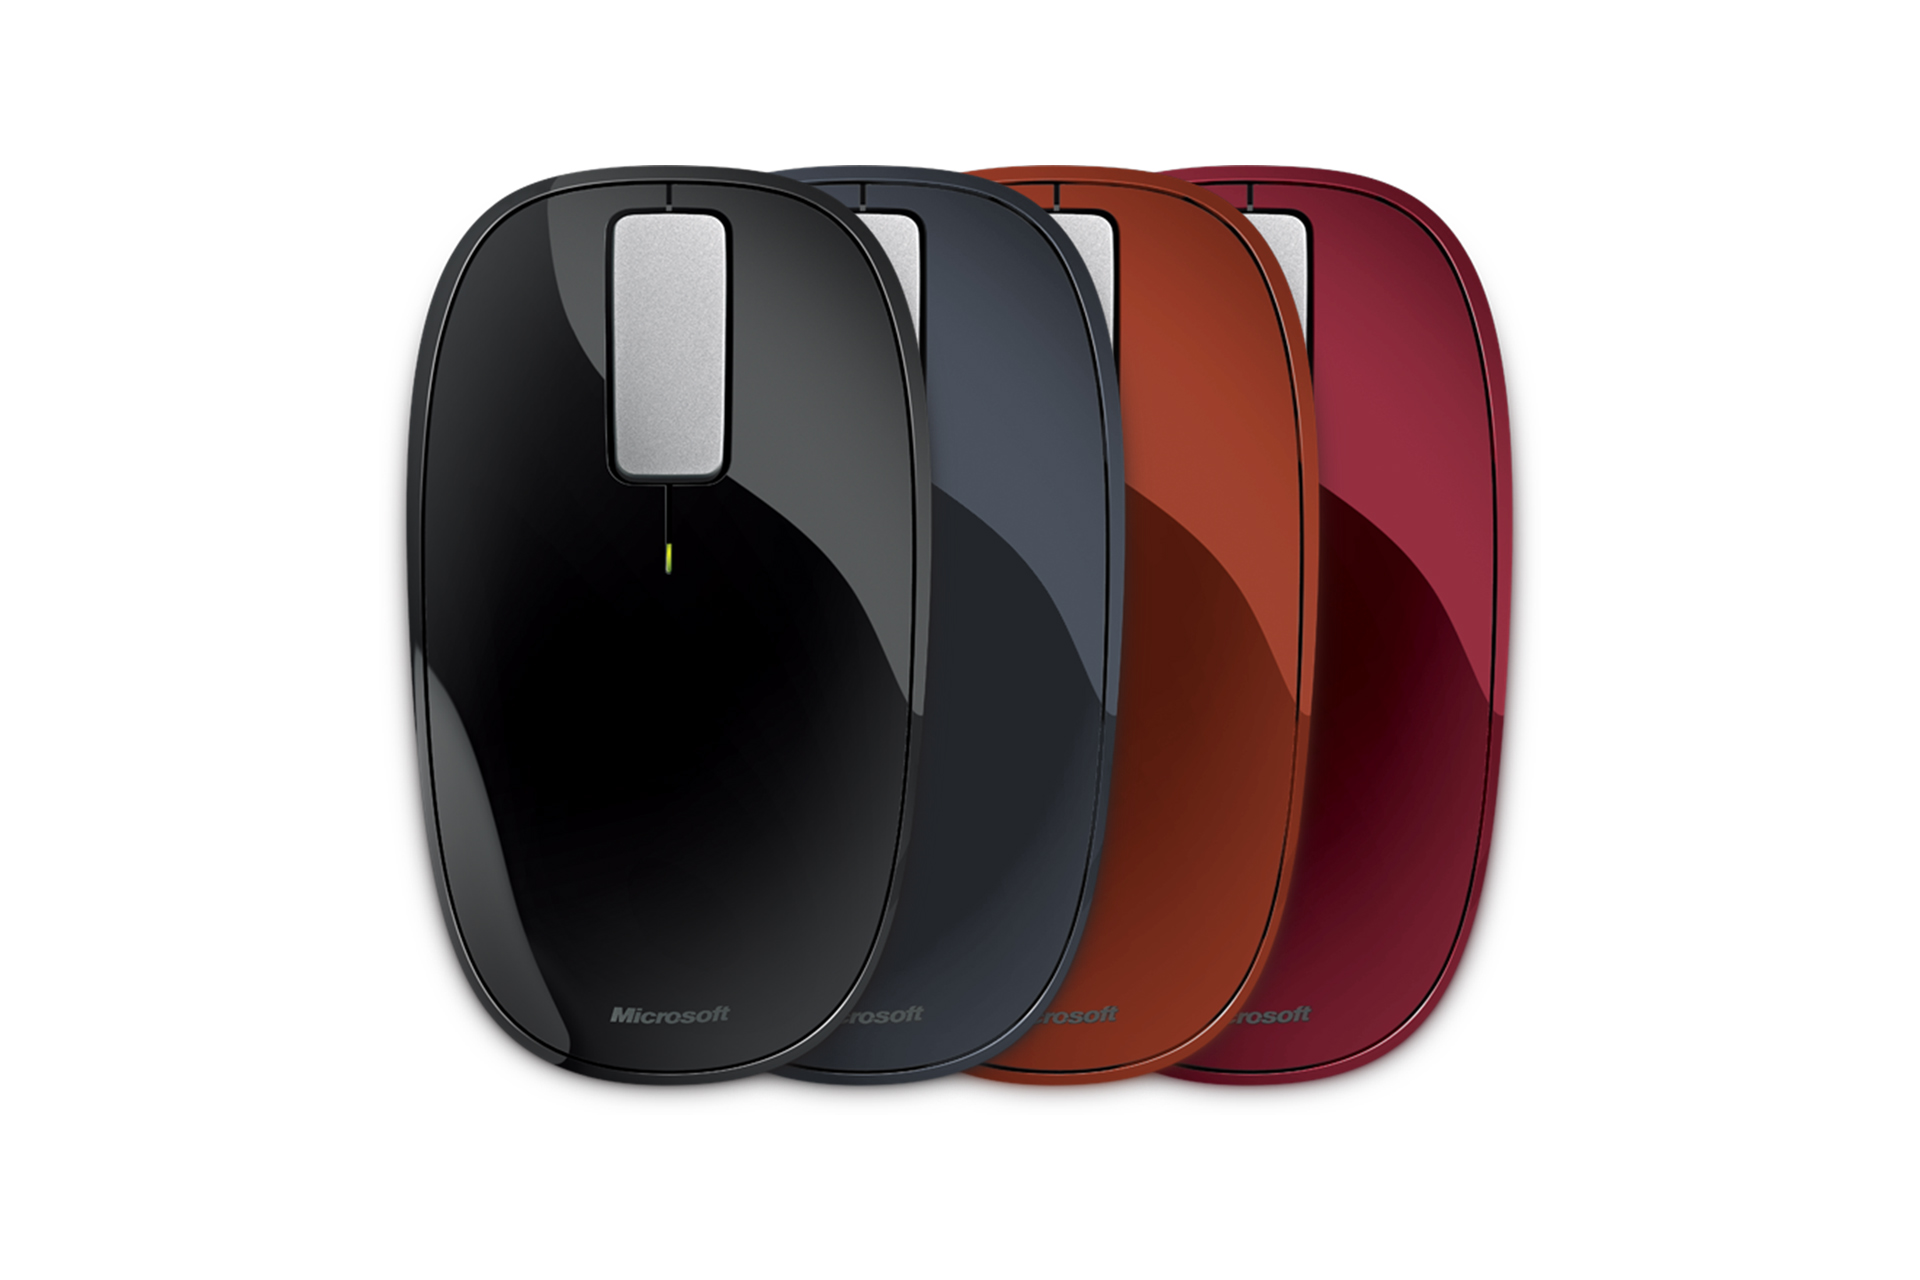 Microsoft Explorer Touch Mouse render